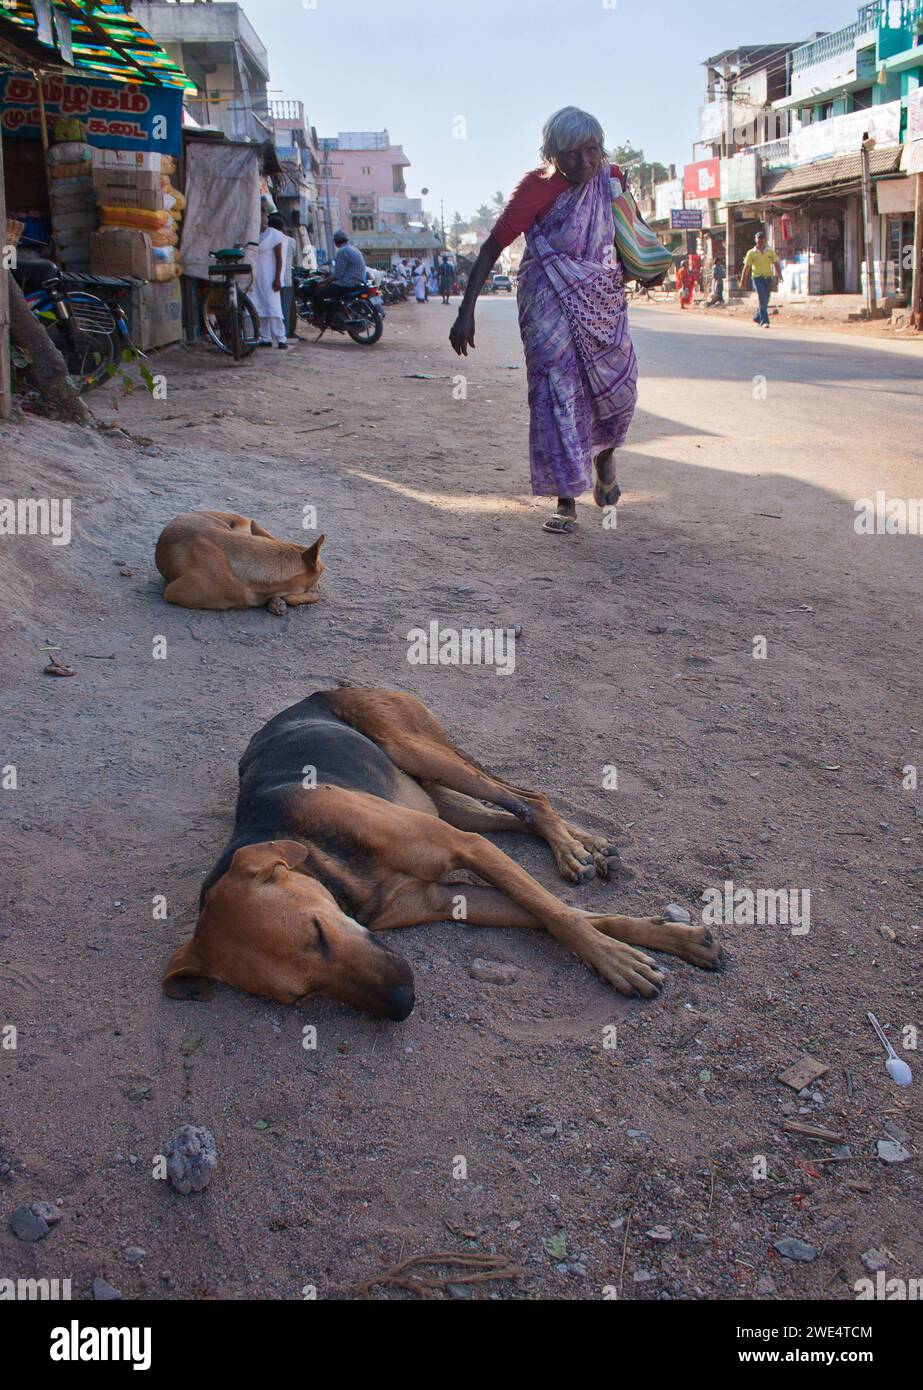 An old woman walking down an Indian street while dogs sleep in the sun Stock Photo